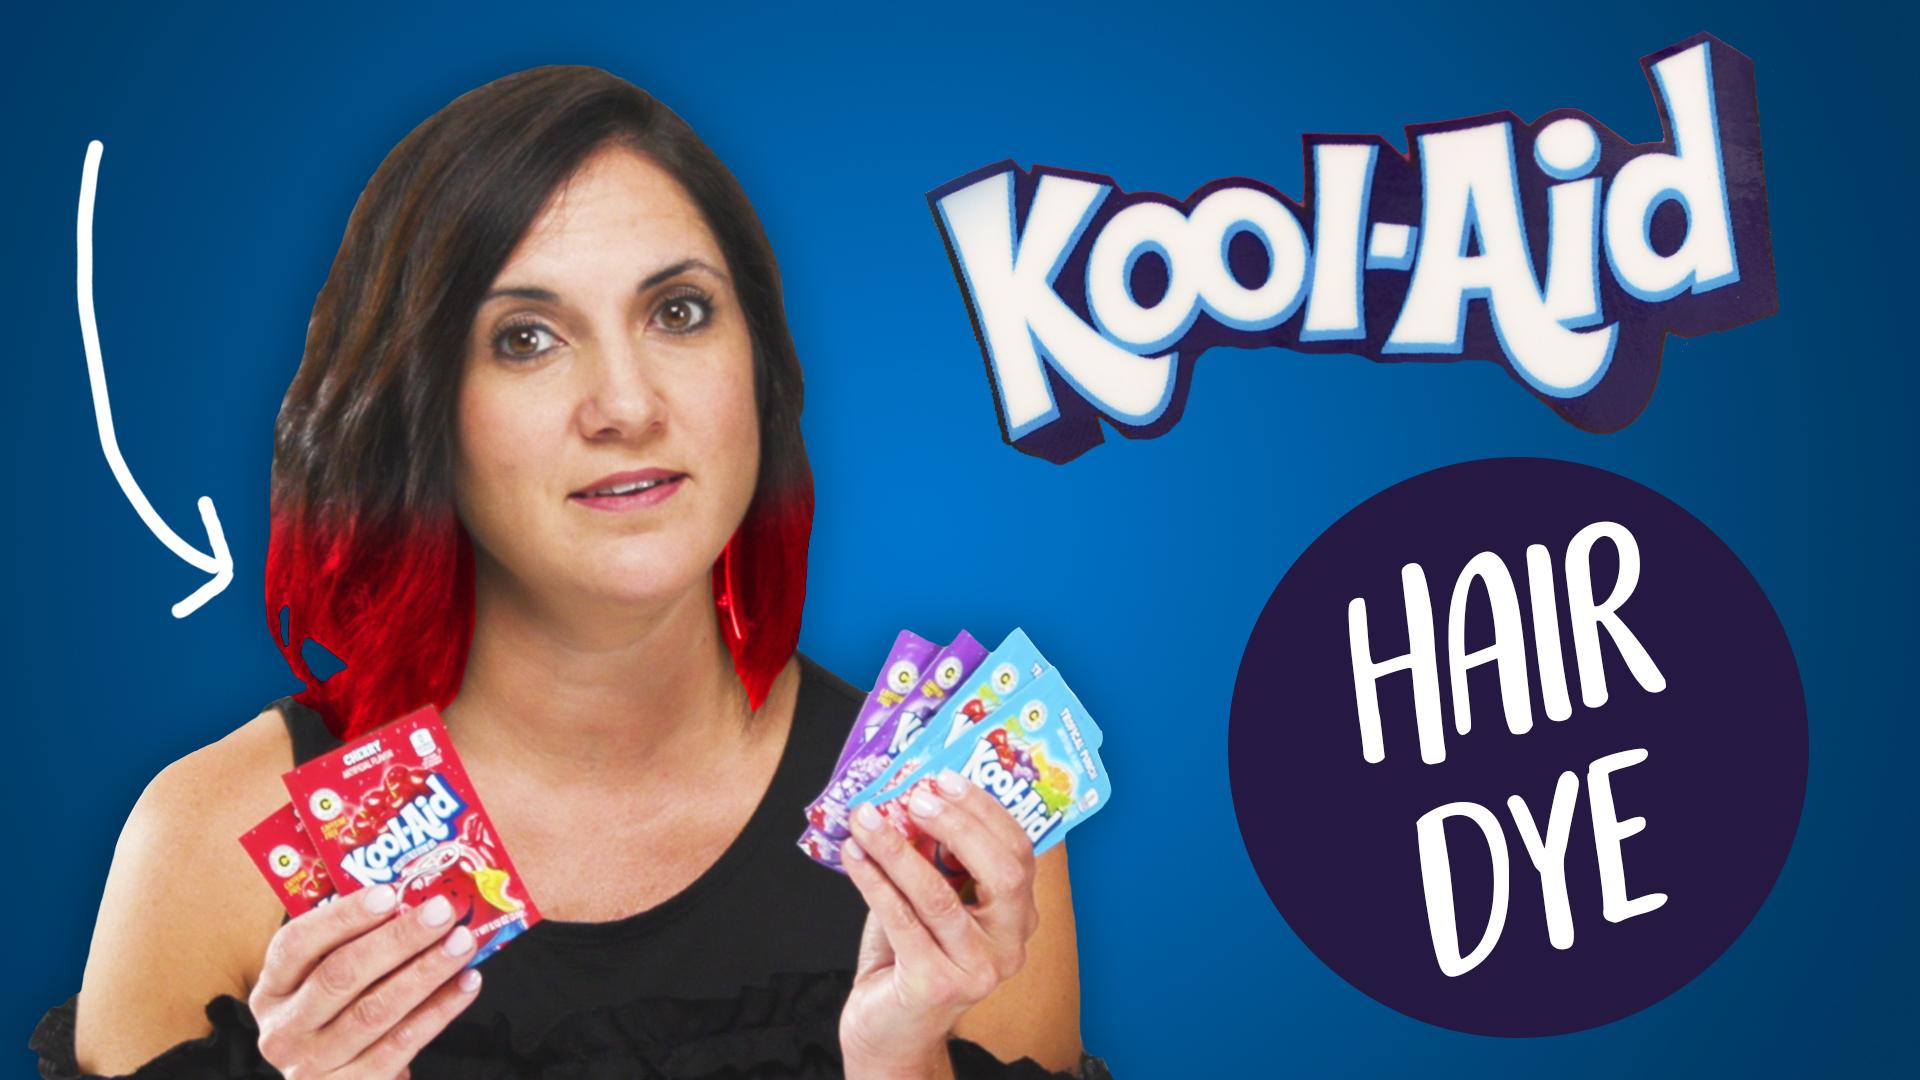 7. Kool-Aid Hair Dye: A Safe and Natural Alternative to Traditional Dyes - wide 1